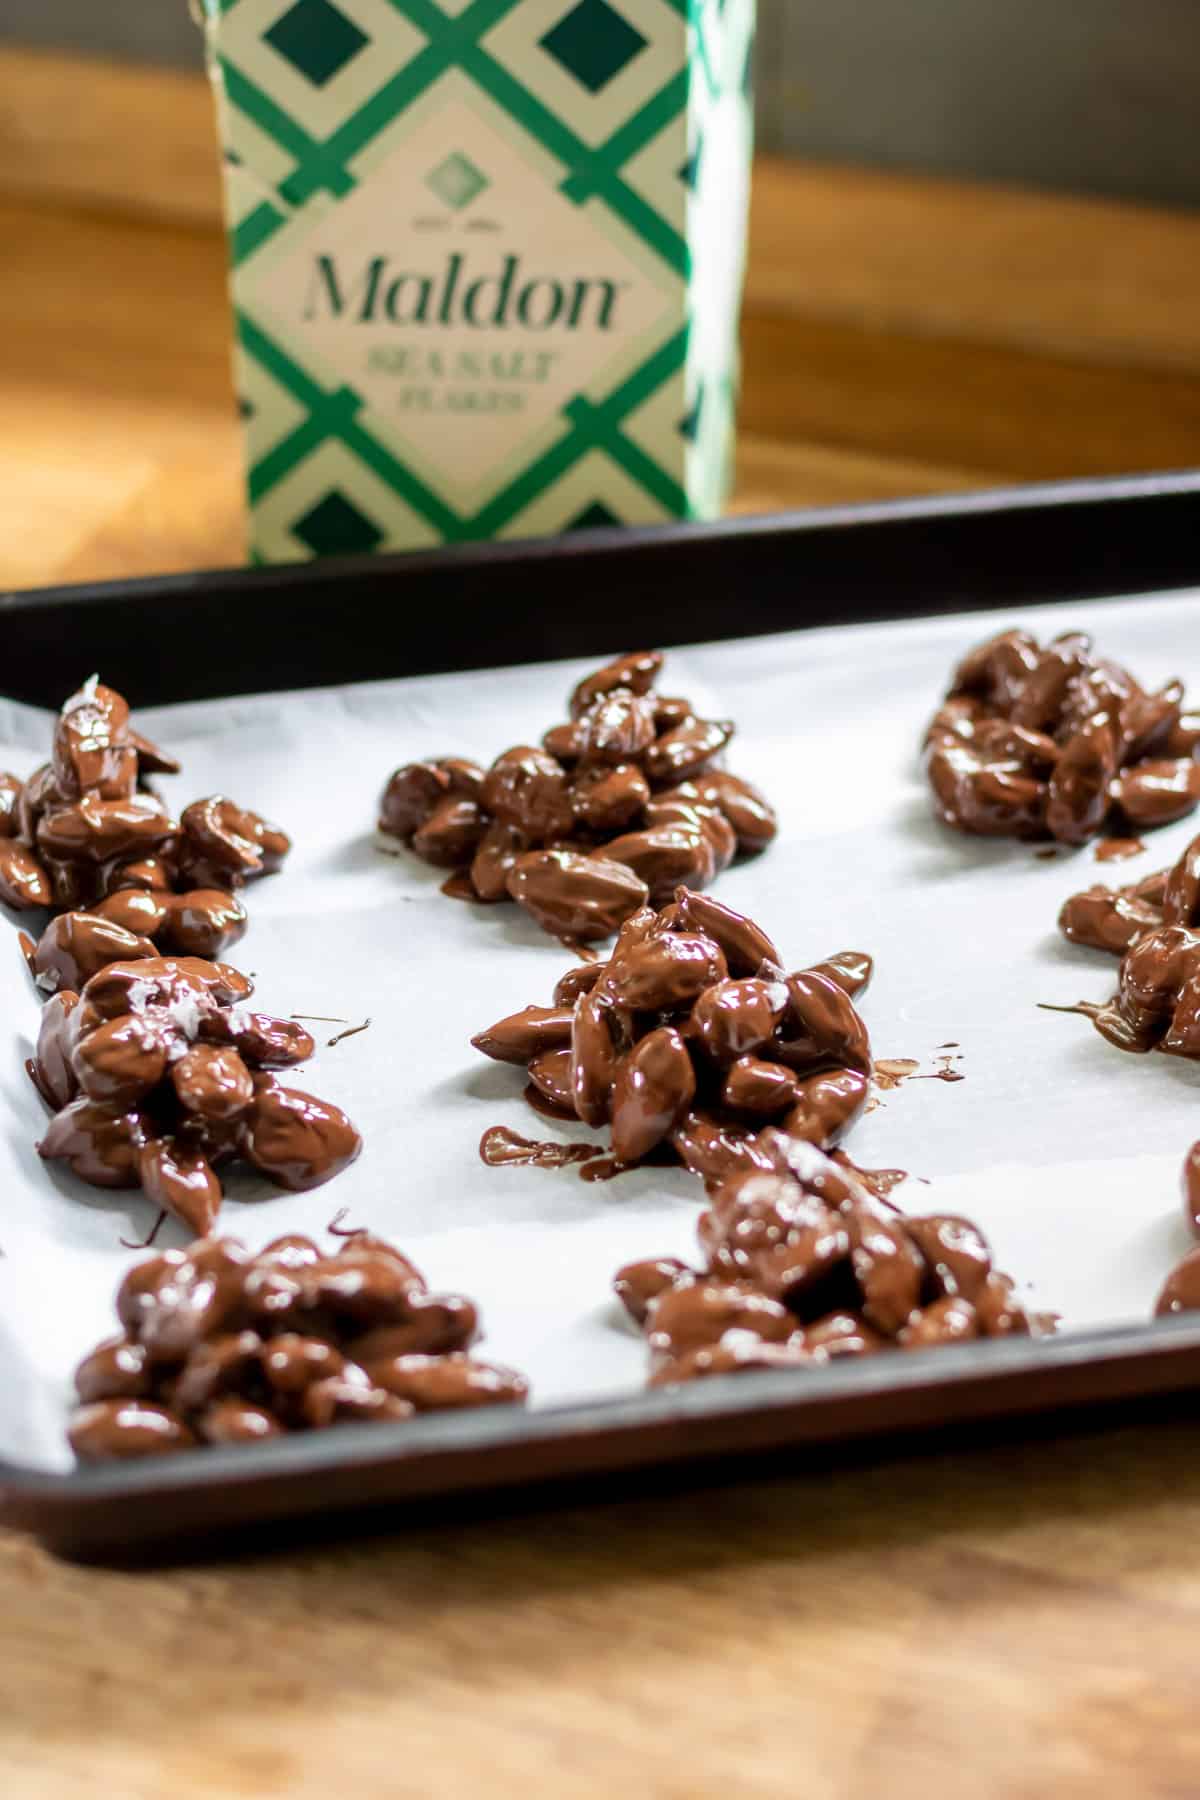 Adding sea salt to the chocolate almond clusters.